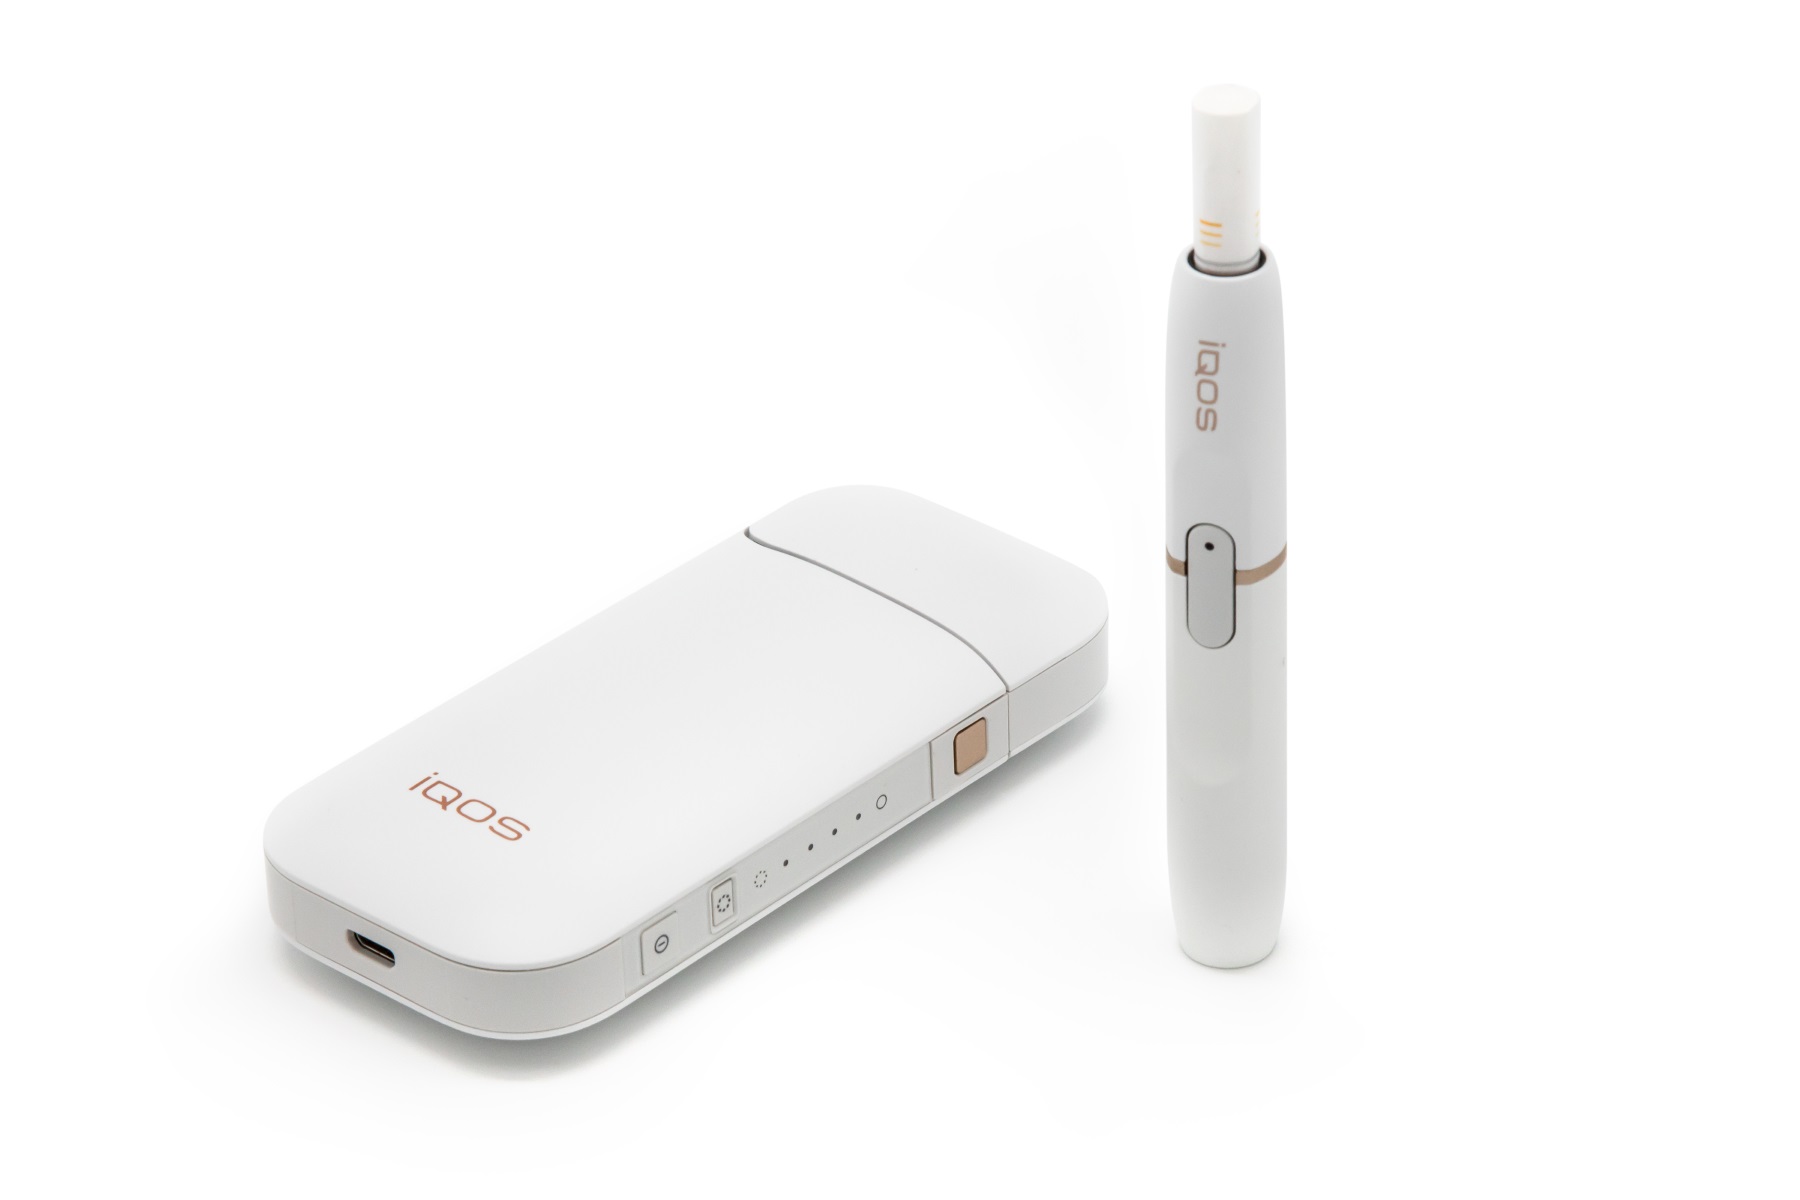 IQOS: A Closer Look at Heated Tobacco Sticks and Vaping